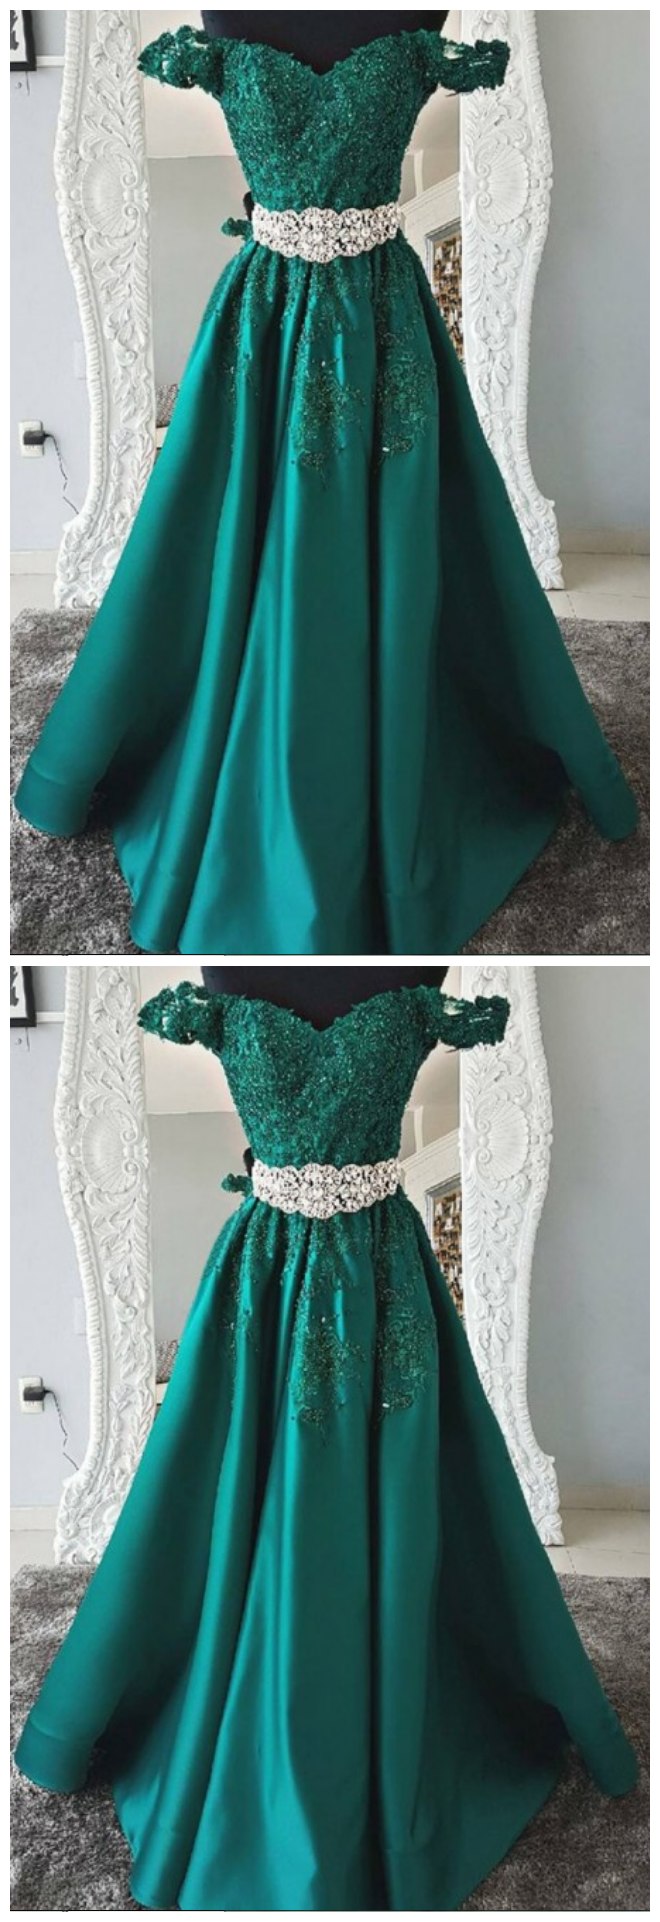 Stunning Off Shoulder Short Sleeves Green Prom Dress With Appliques Beading